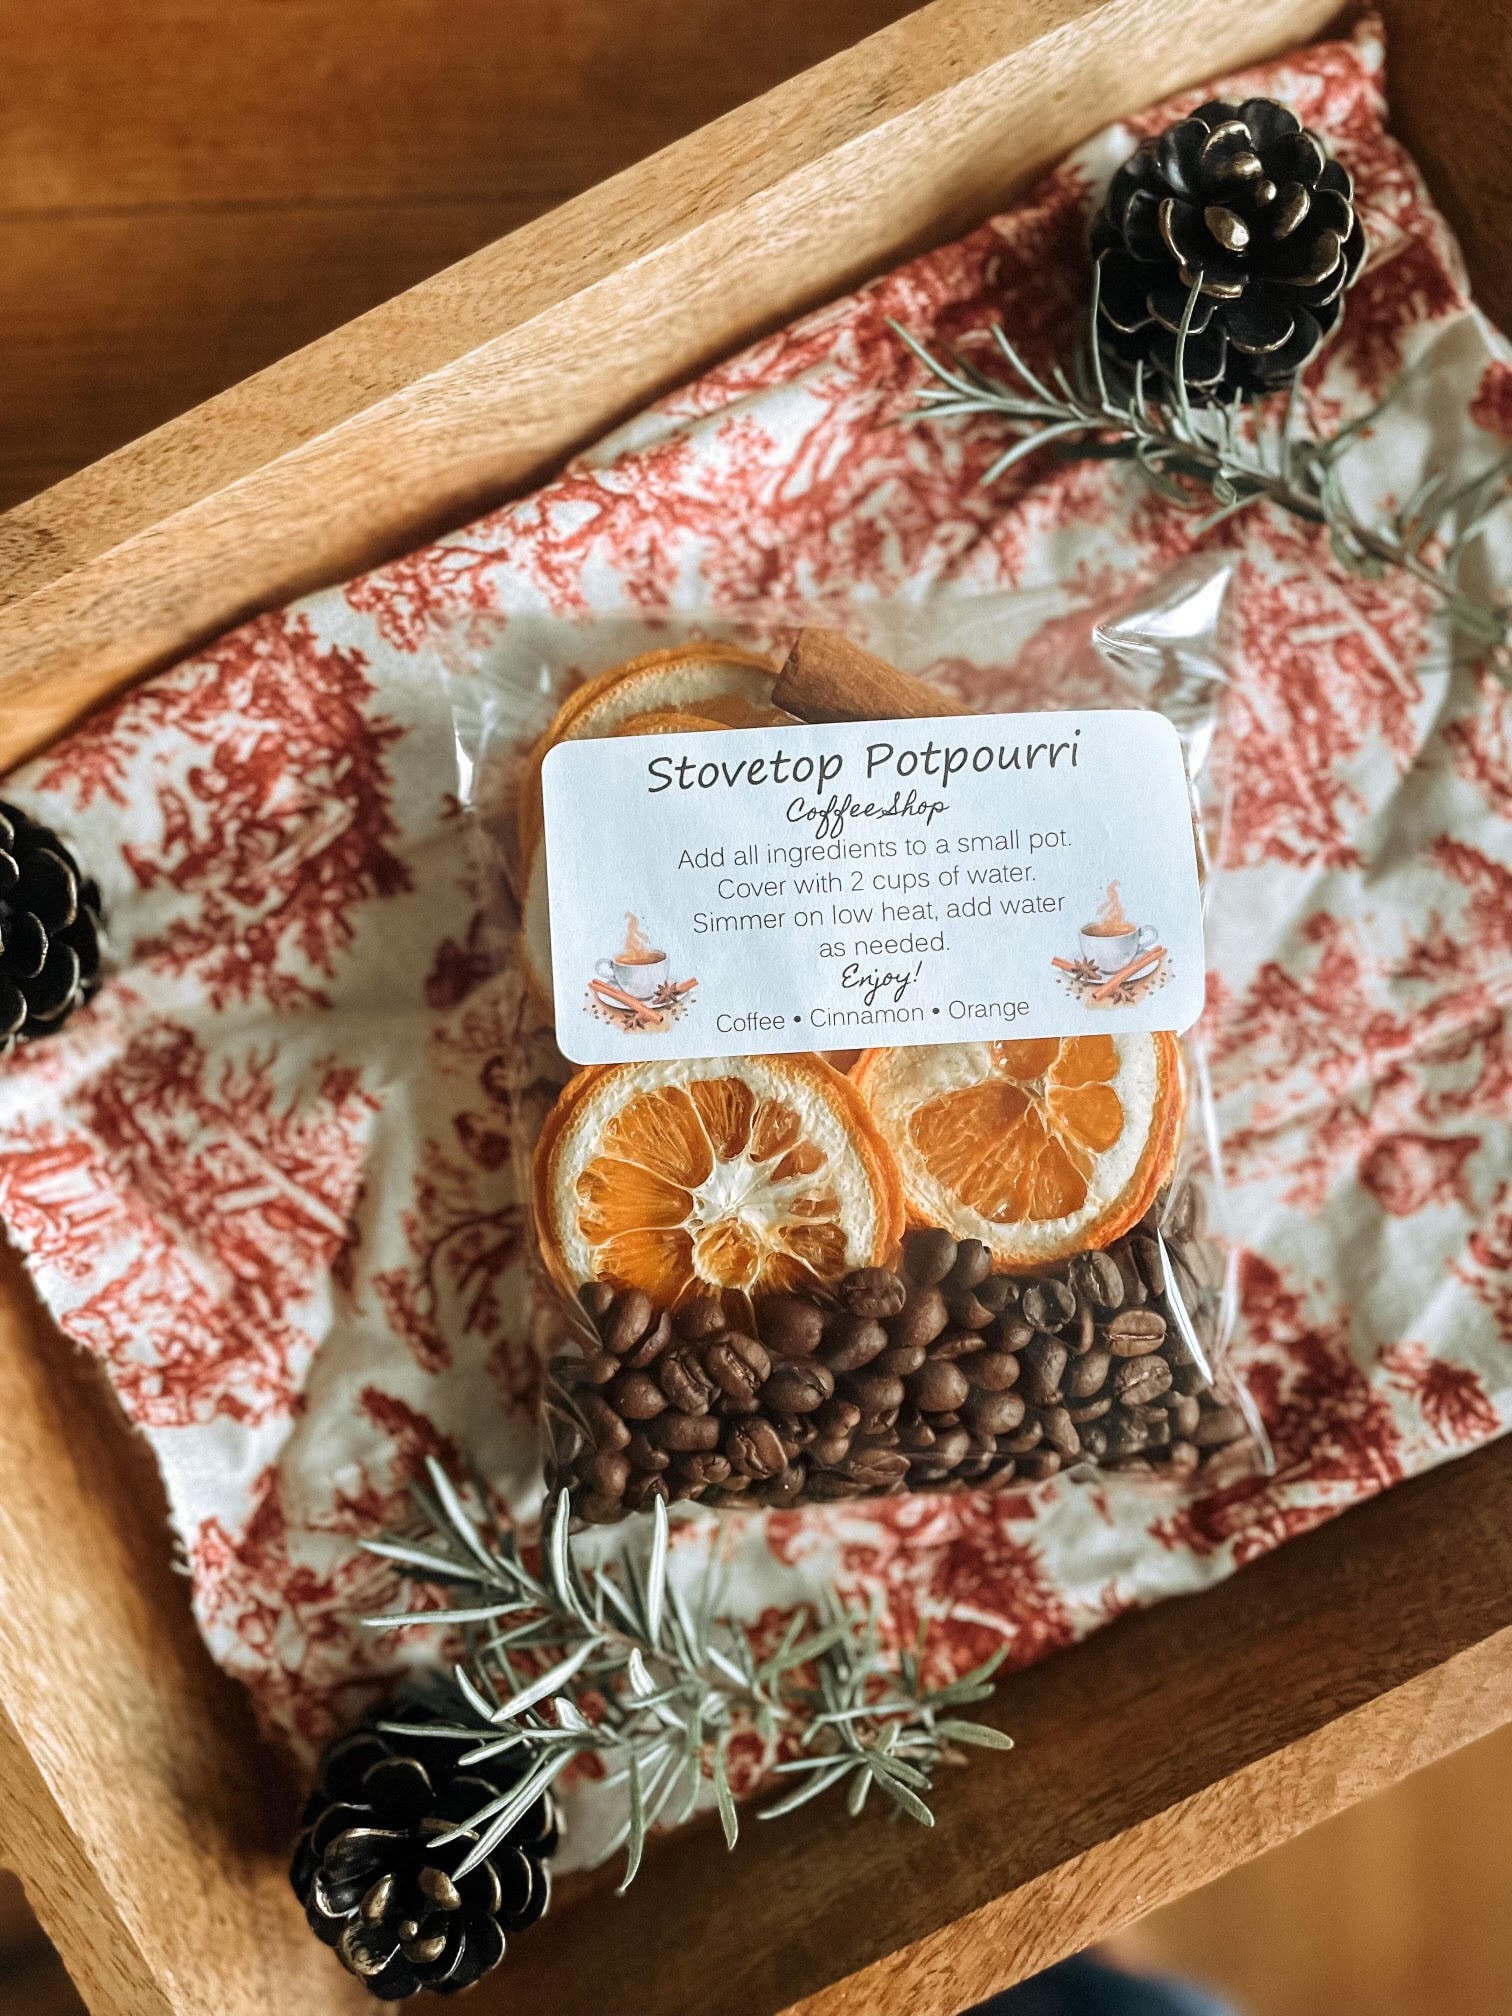 Stove Top Simmer Potpourri Coffee Shop w/ a Mixture of Dried Orange Slices,  Organic Coffee Beans, and Cinnamon Sticks / Holiday gifts